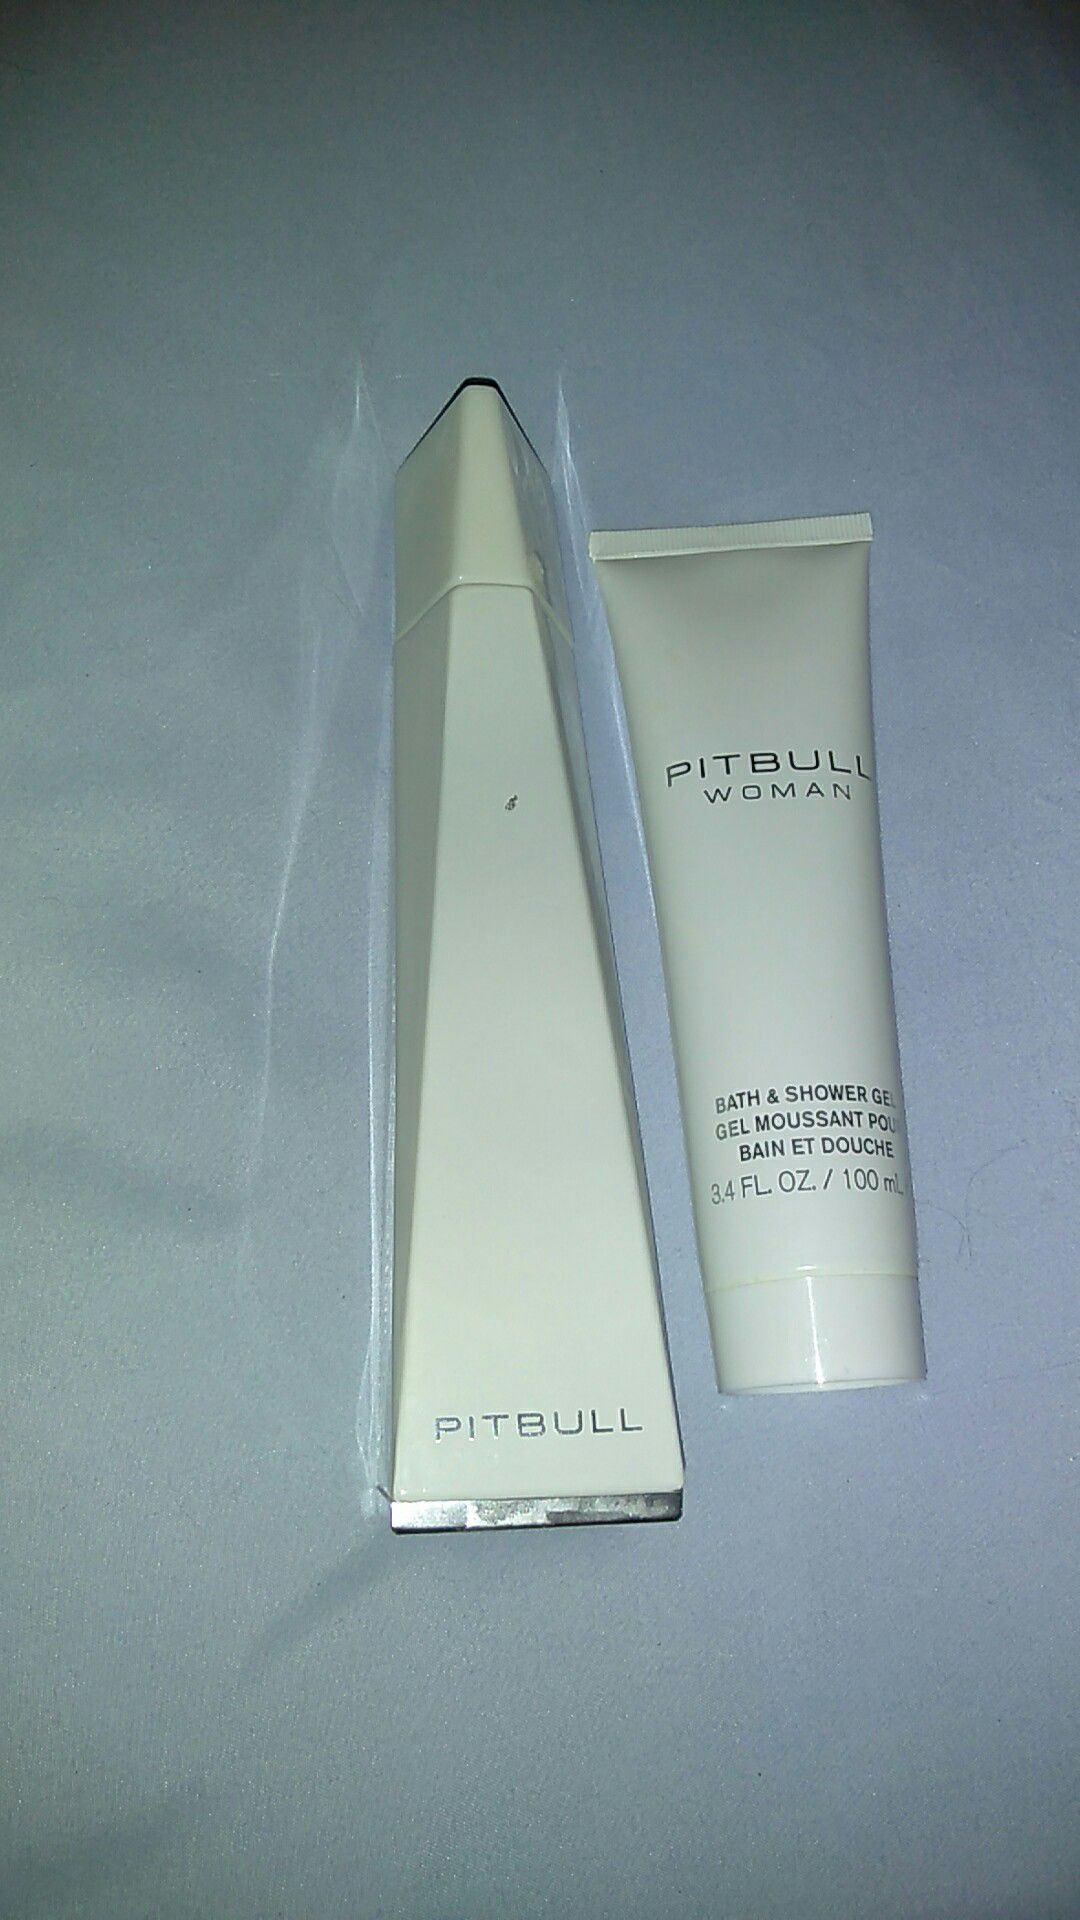 Pitbull lotion and perfume for women